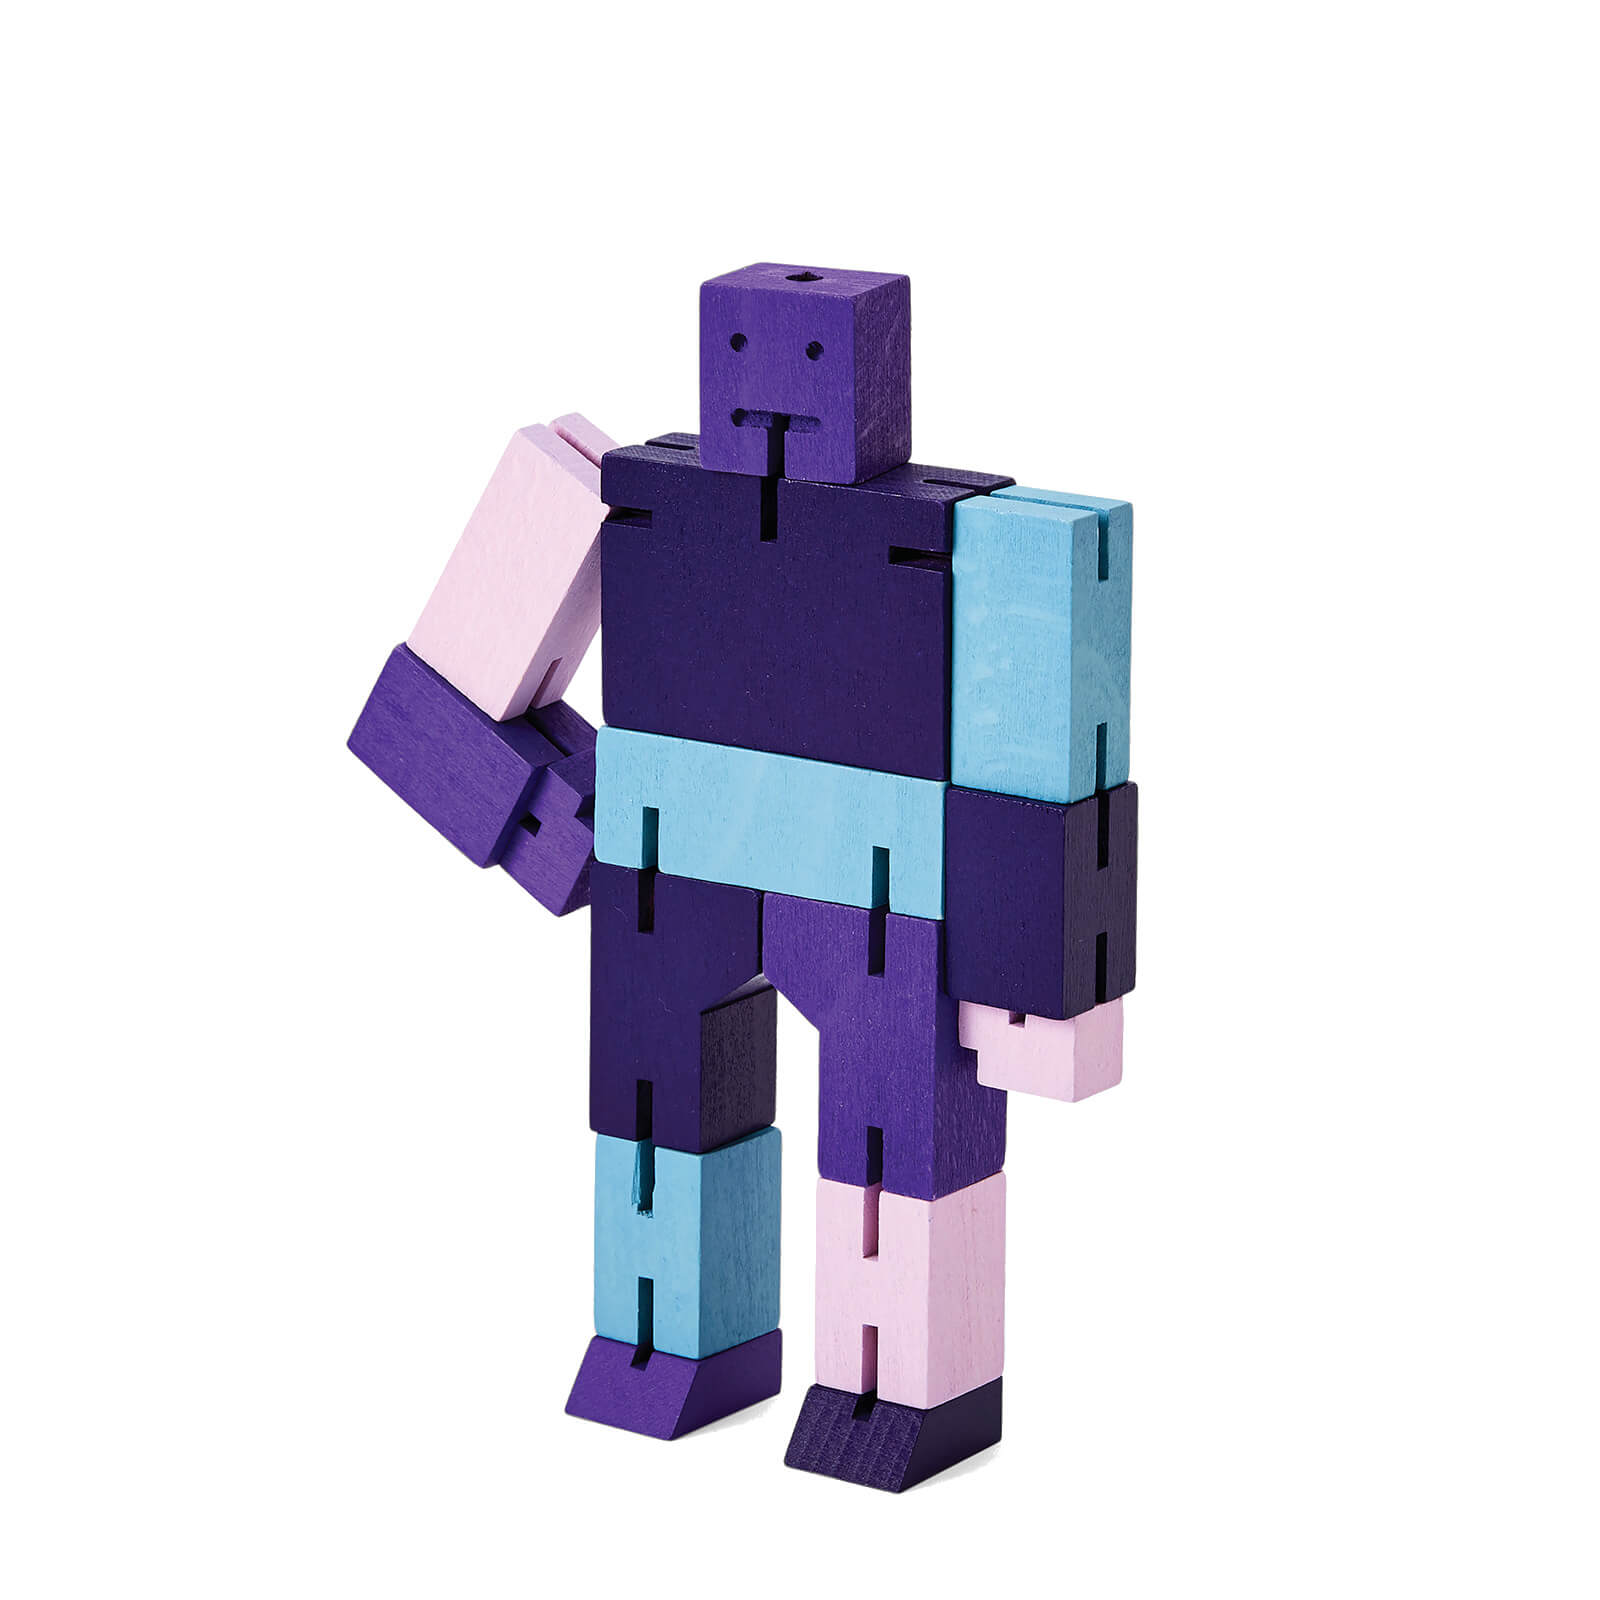 Areaware Cubebot Capsule Collection - Small - Purple Multi